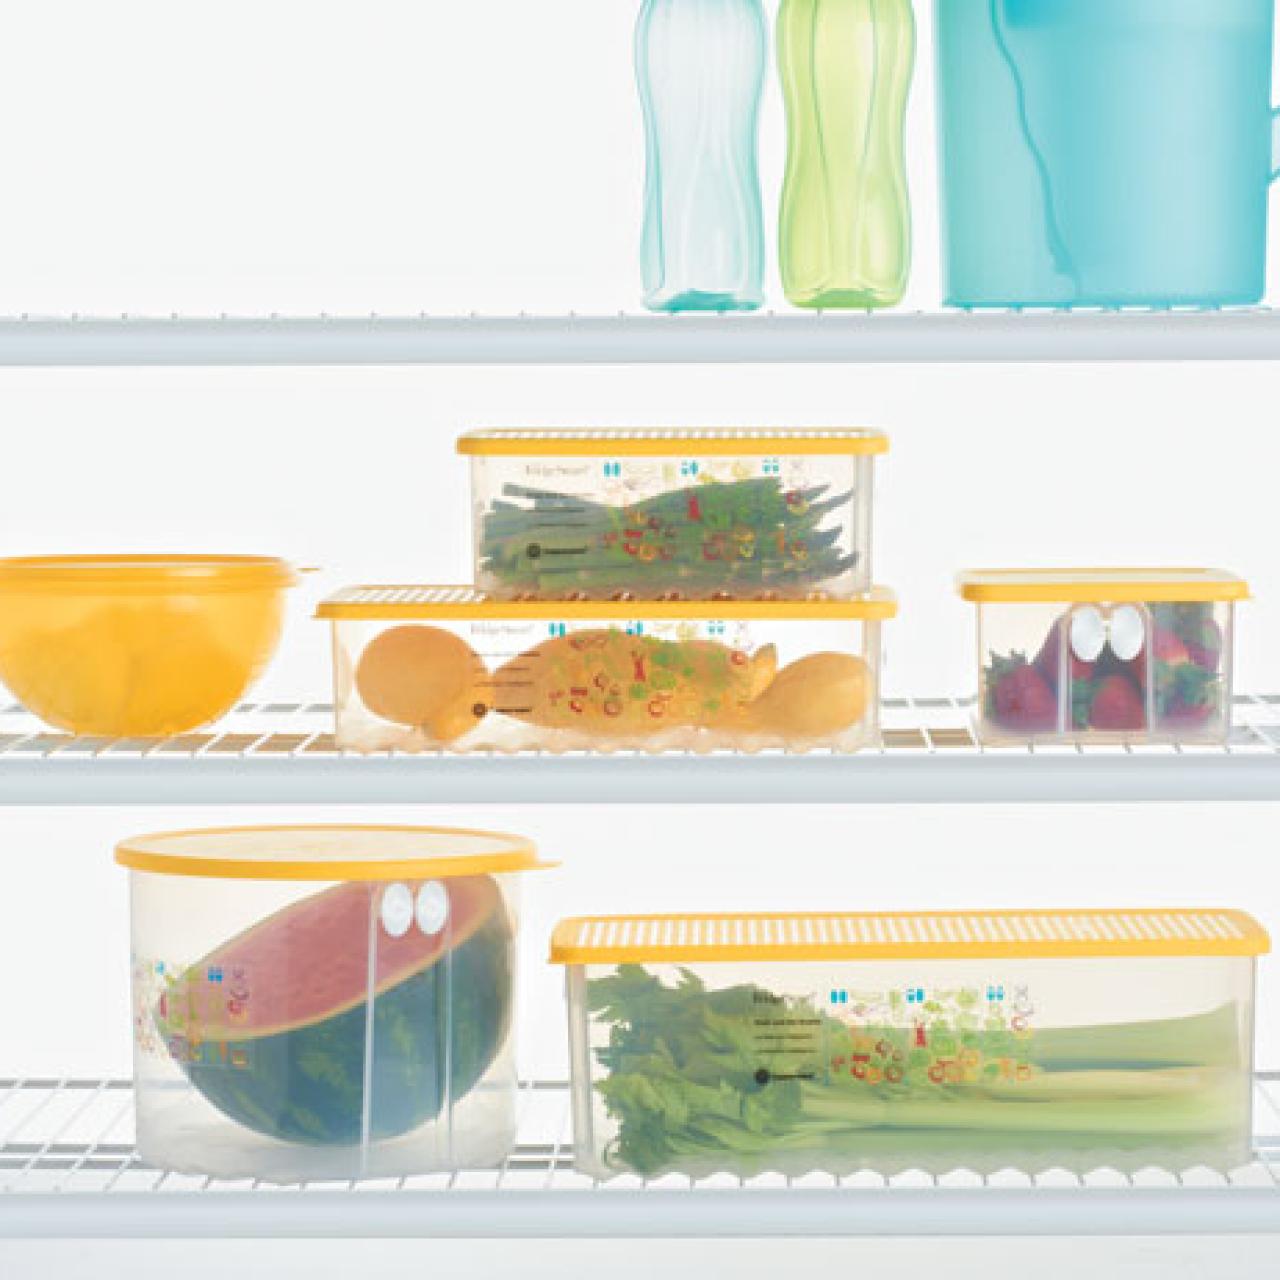 FridgeSmart Small Container By Tupperware-Set Of 2